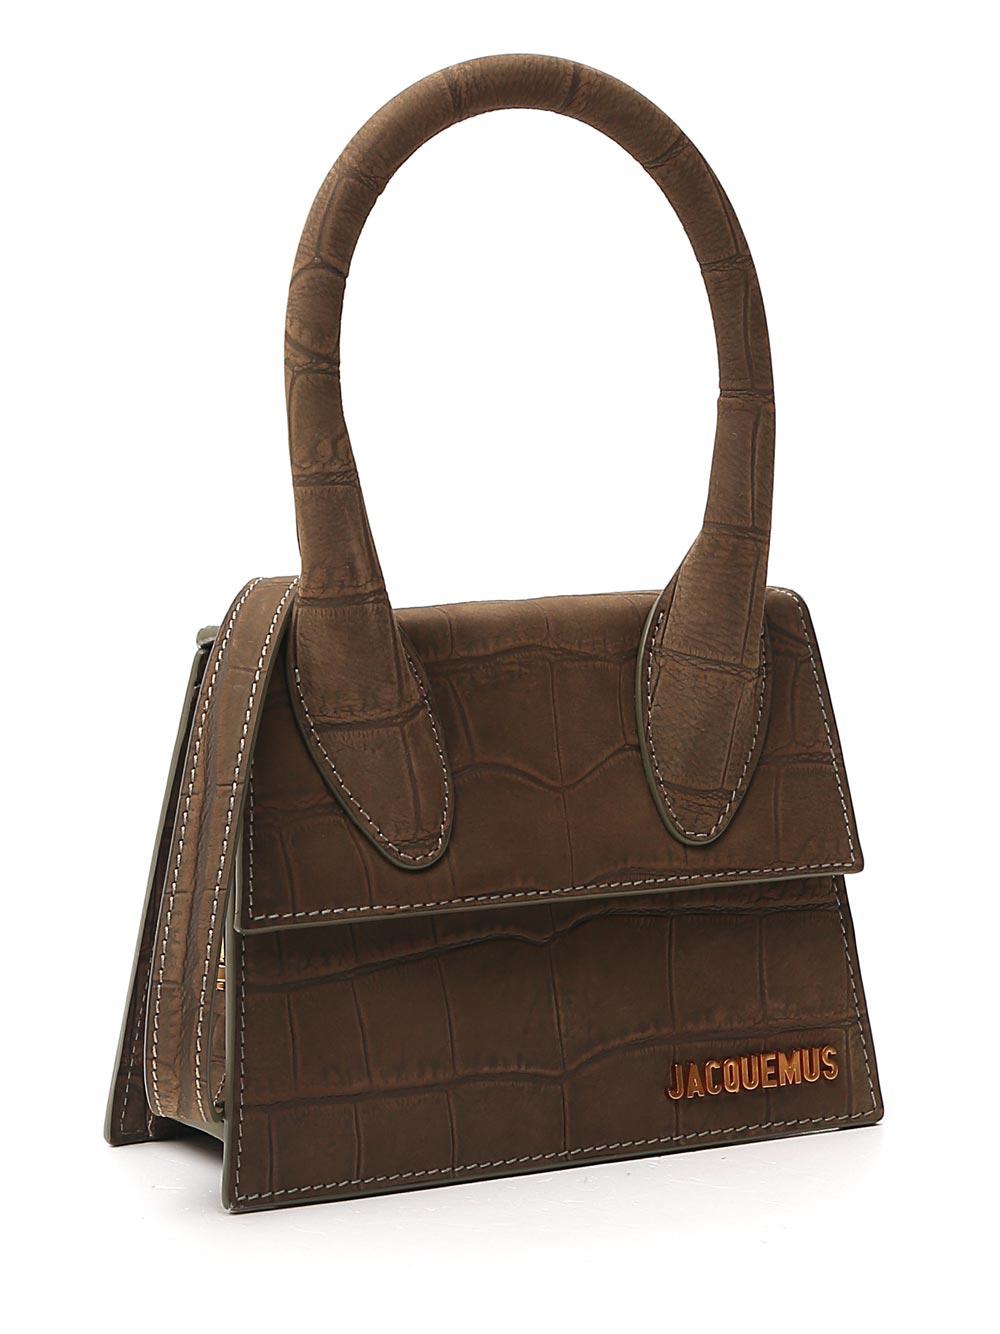 Jacquemus Le Chiquito Moyen Crossbody Bag in Brown | Lyst